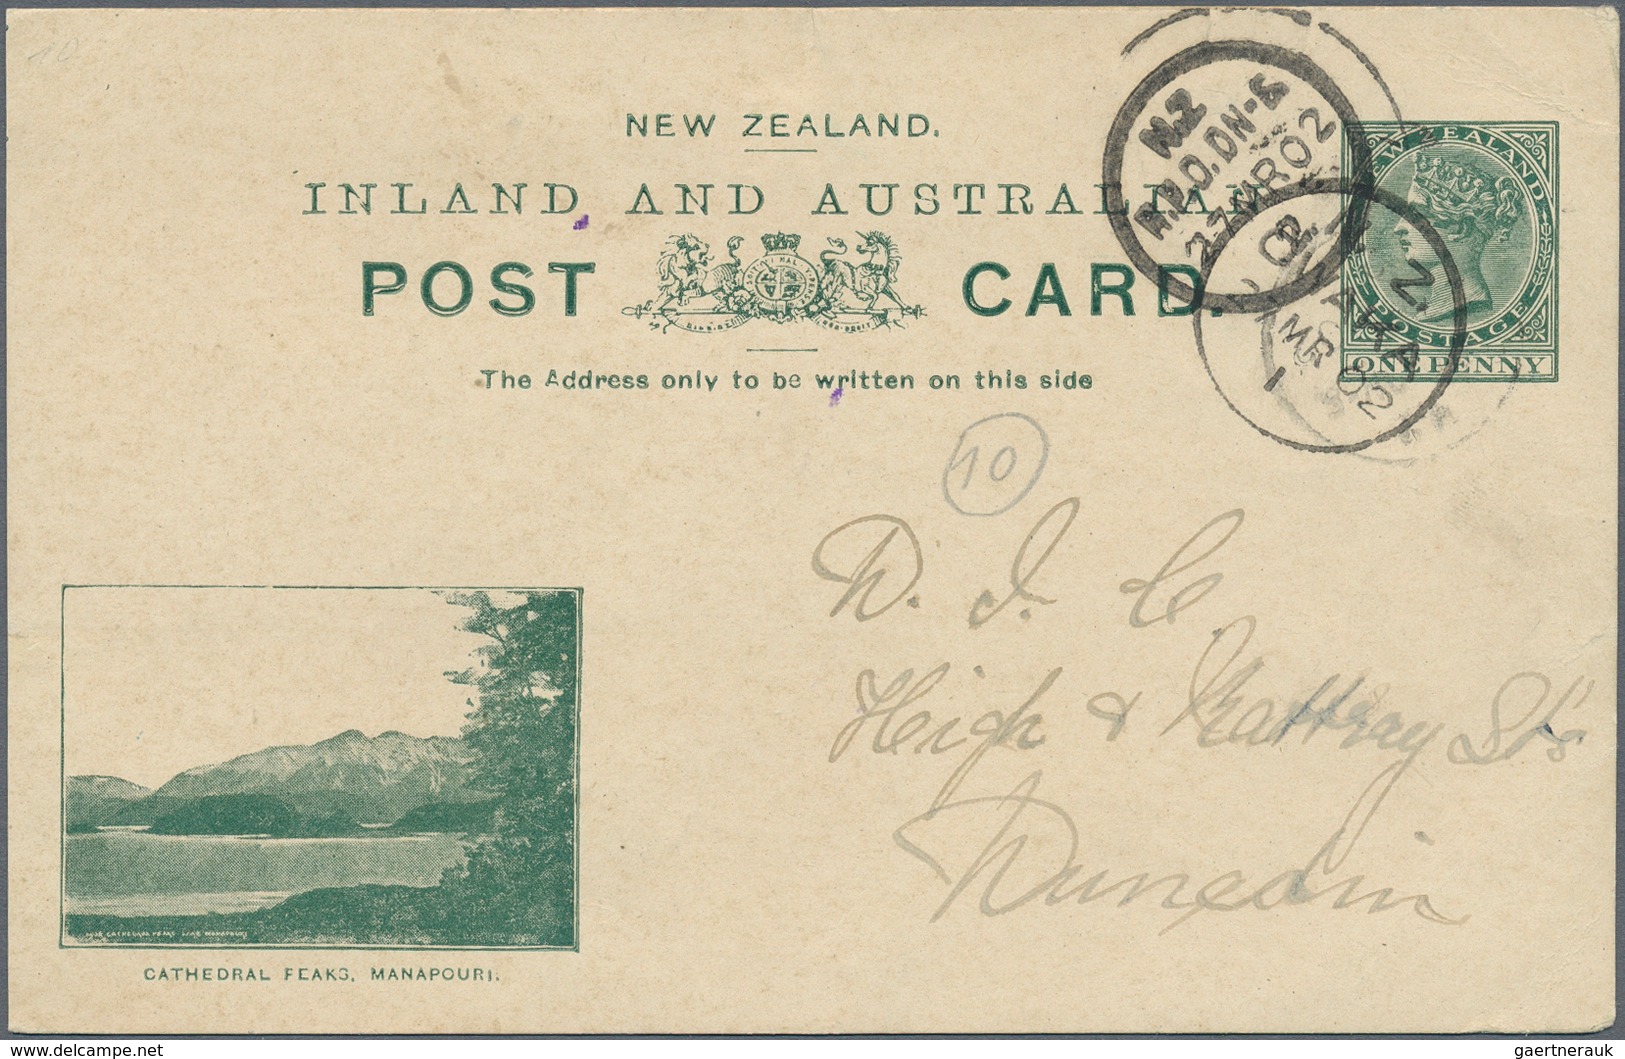 Neuseeland - Ganzsachen: 1900/1908, six different pictorial stat. postcards QV 1d. green or brown wi